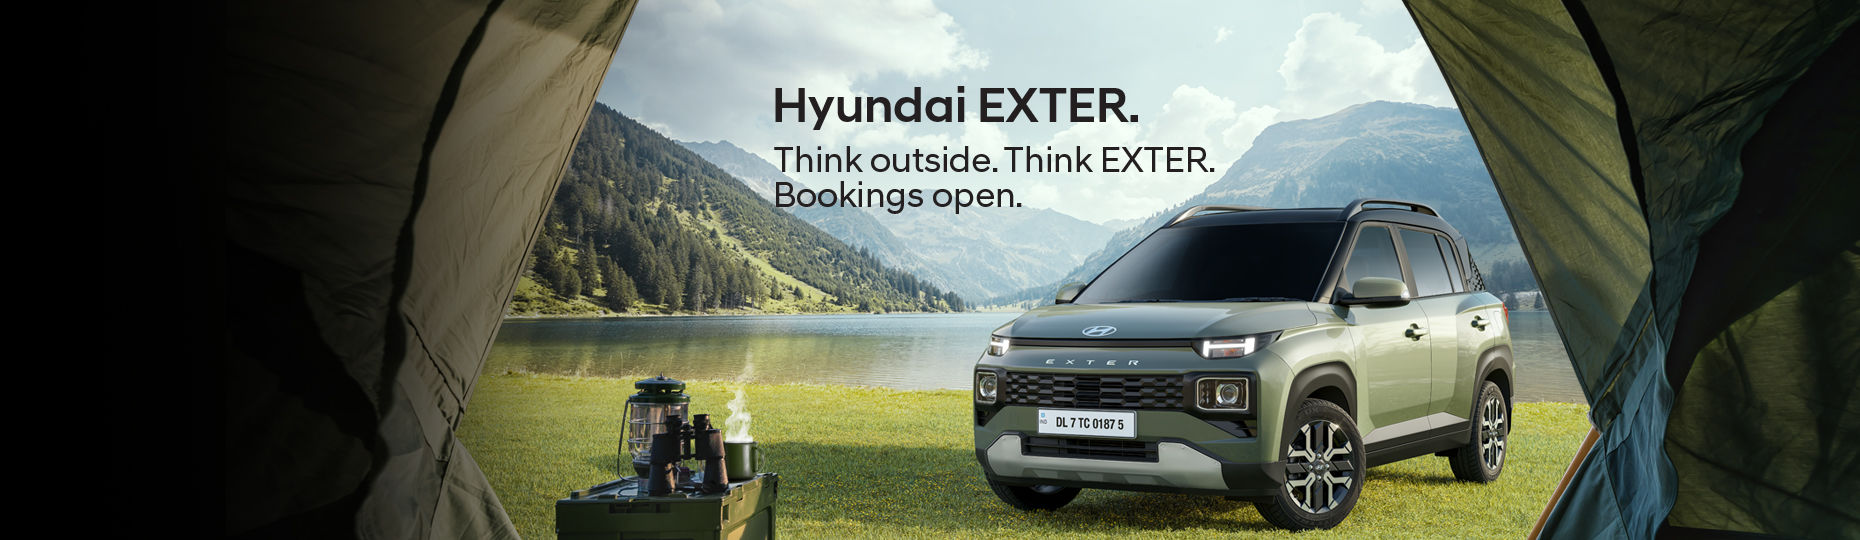 Hyundai Exter launching on 10th July: with exiting features